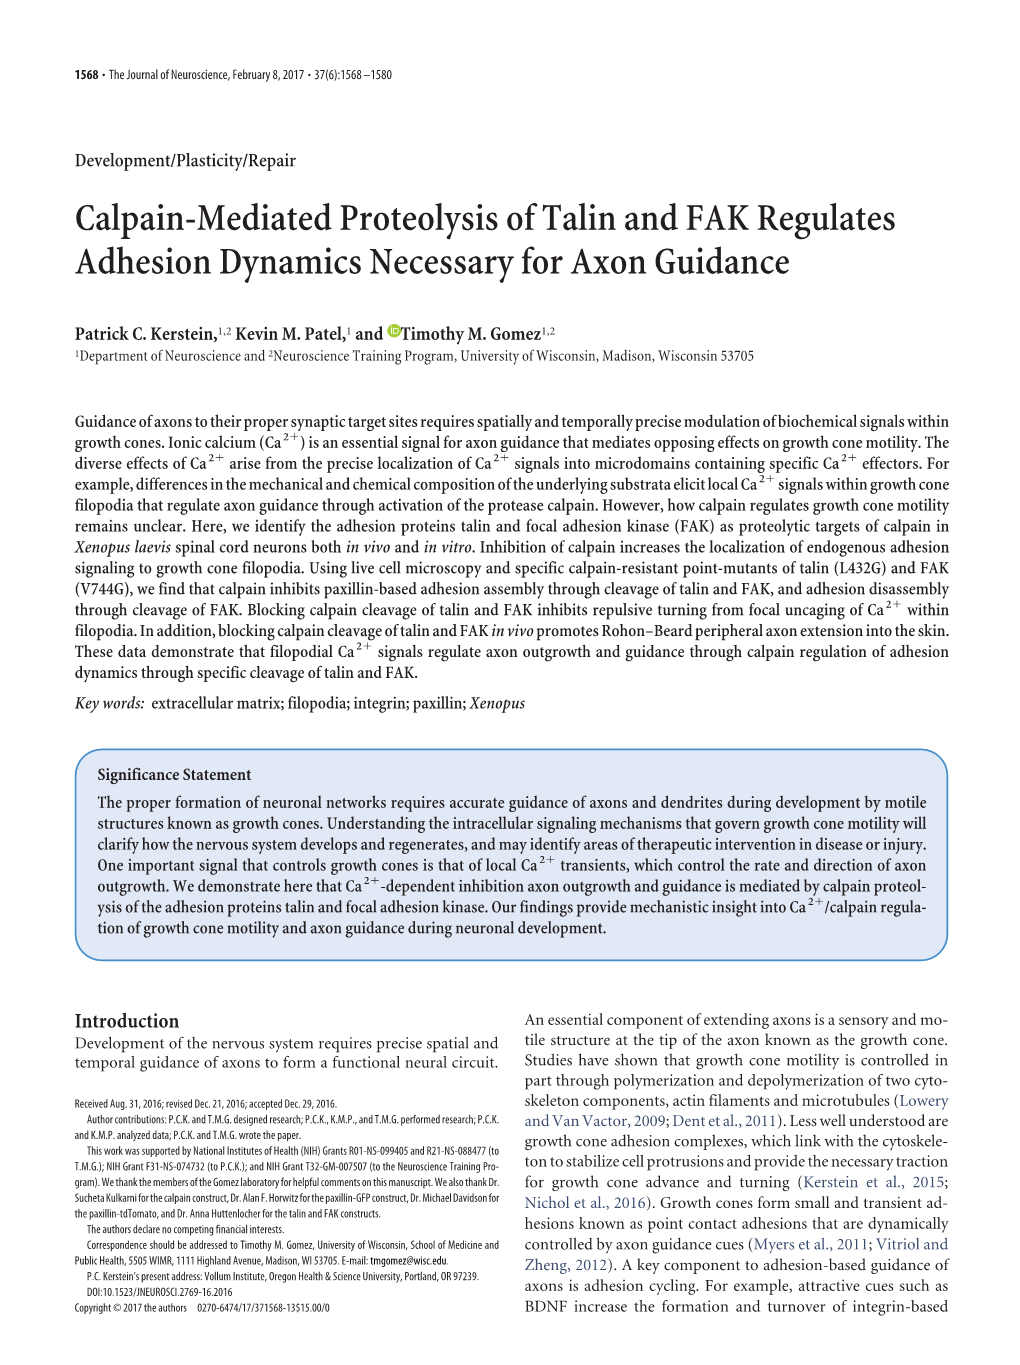 Calpain-Mediated Proteolysis of Talin and FAK Regulates Adhesion Dynamics Necessary for Axon Guidance